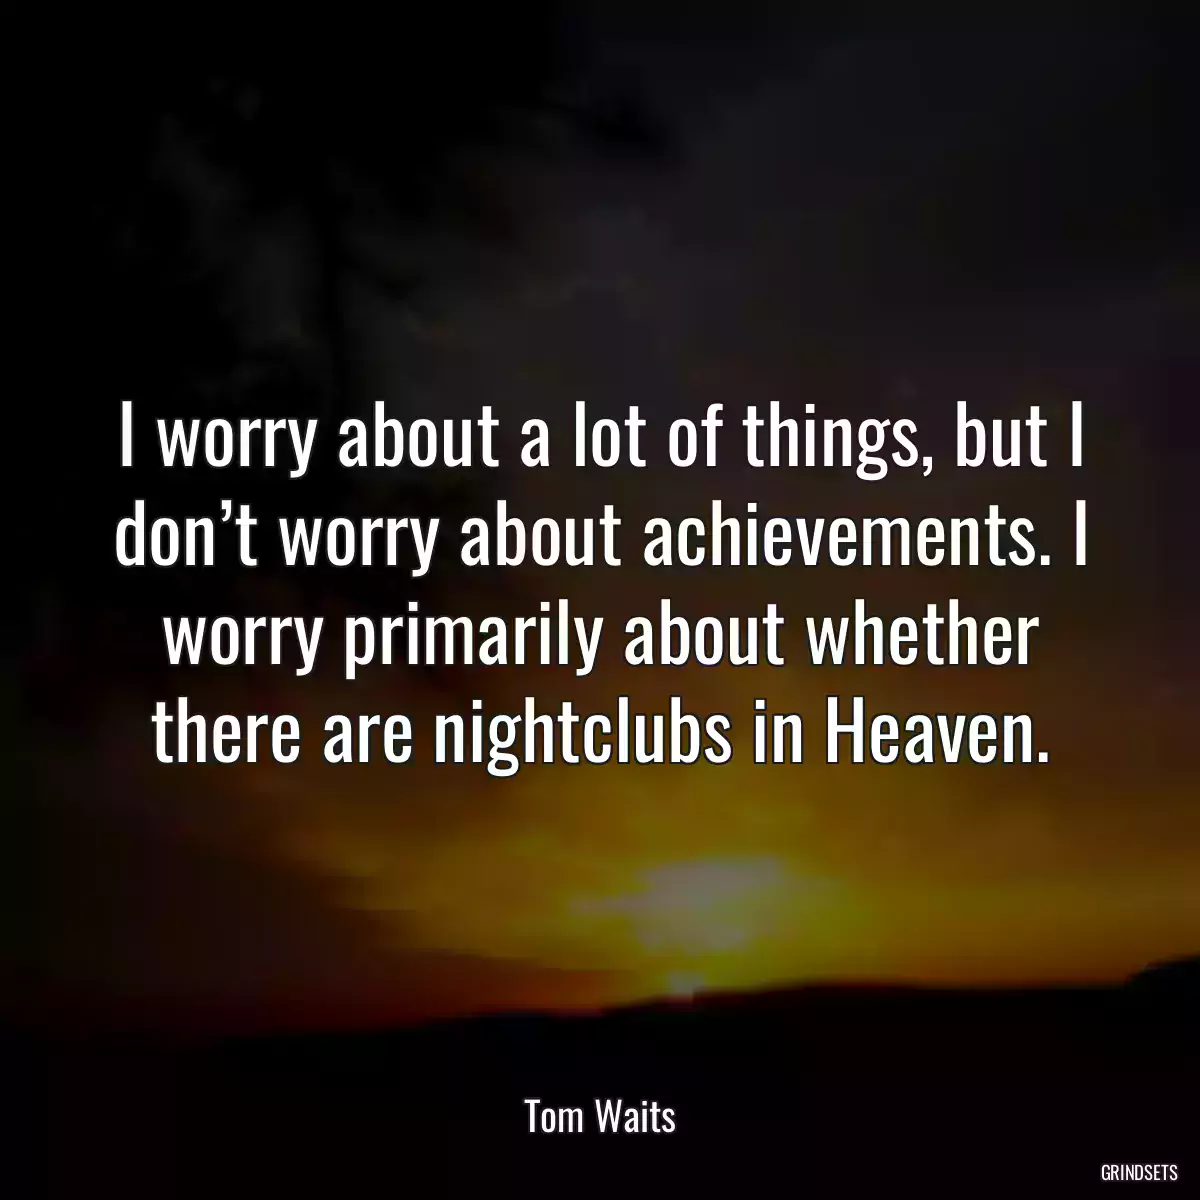 I worry about a lot of things, but I don’t worry about achievements. I worry primarily about whether there are nightclubs in Heaven.